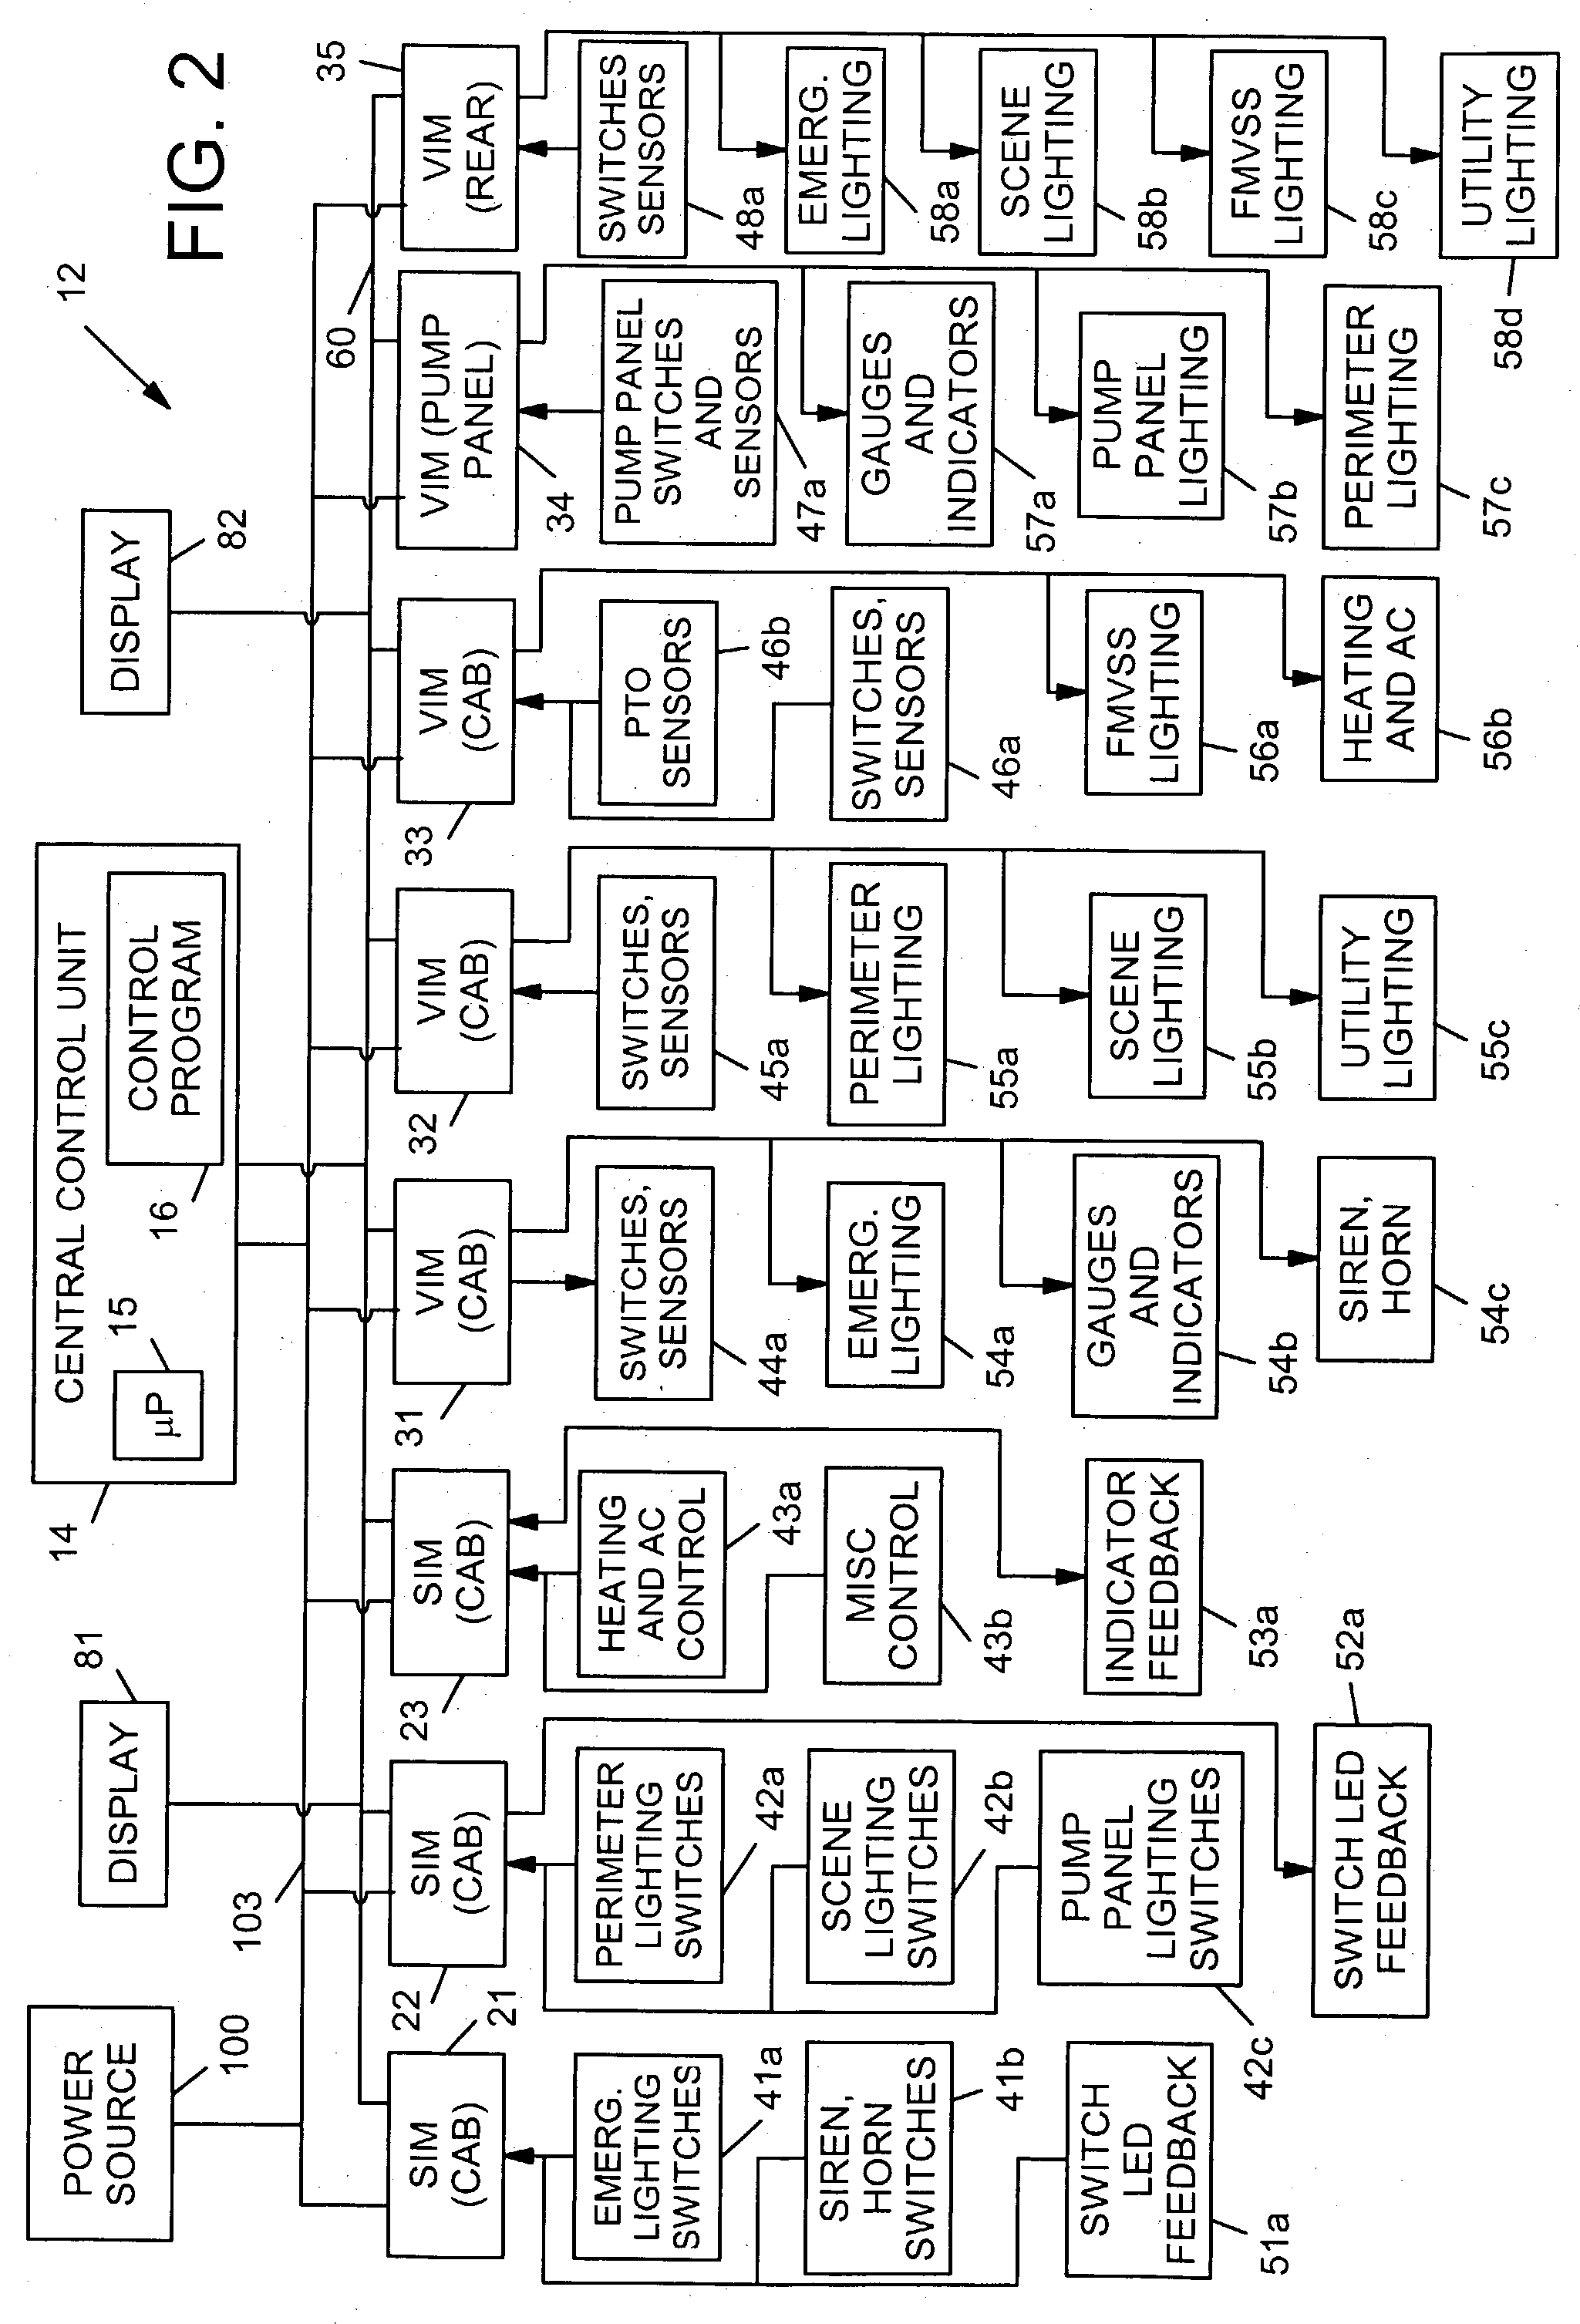 Turret targeting system and method for a fire fighting vehicle